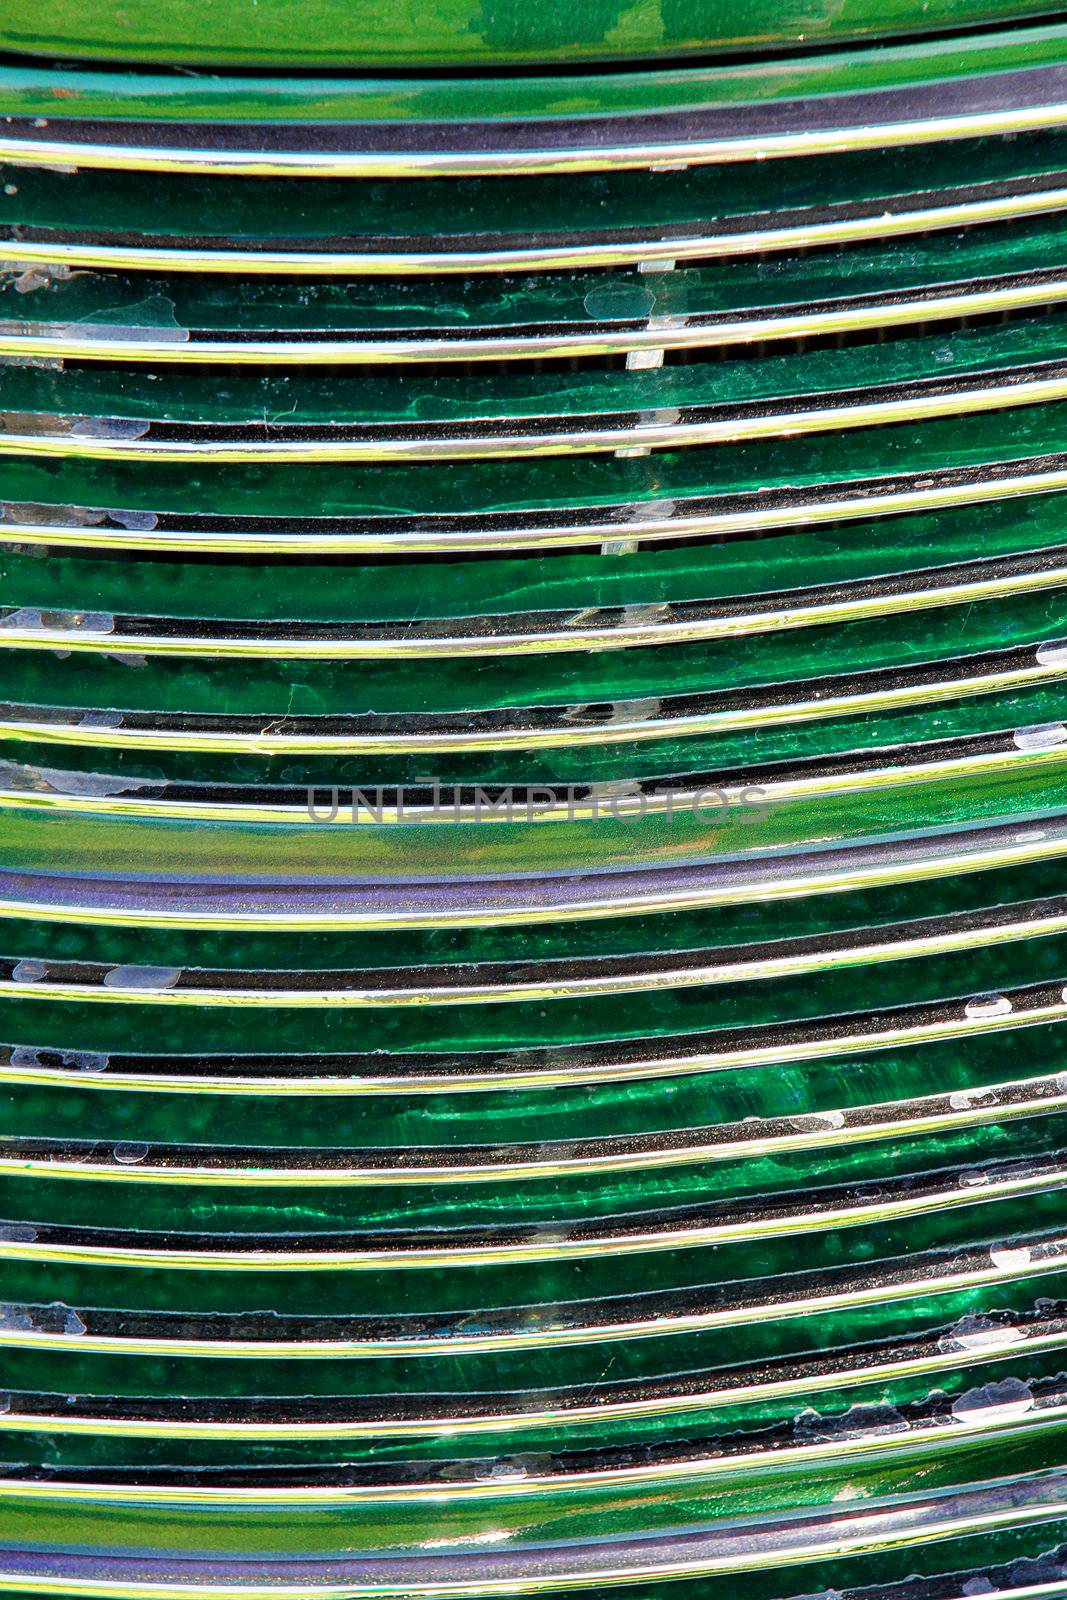 Grill of old or vontage car with custom green radiator metallic paint job, great abstract and texture background.